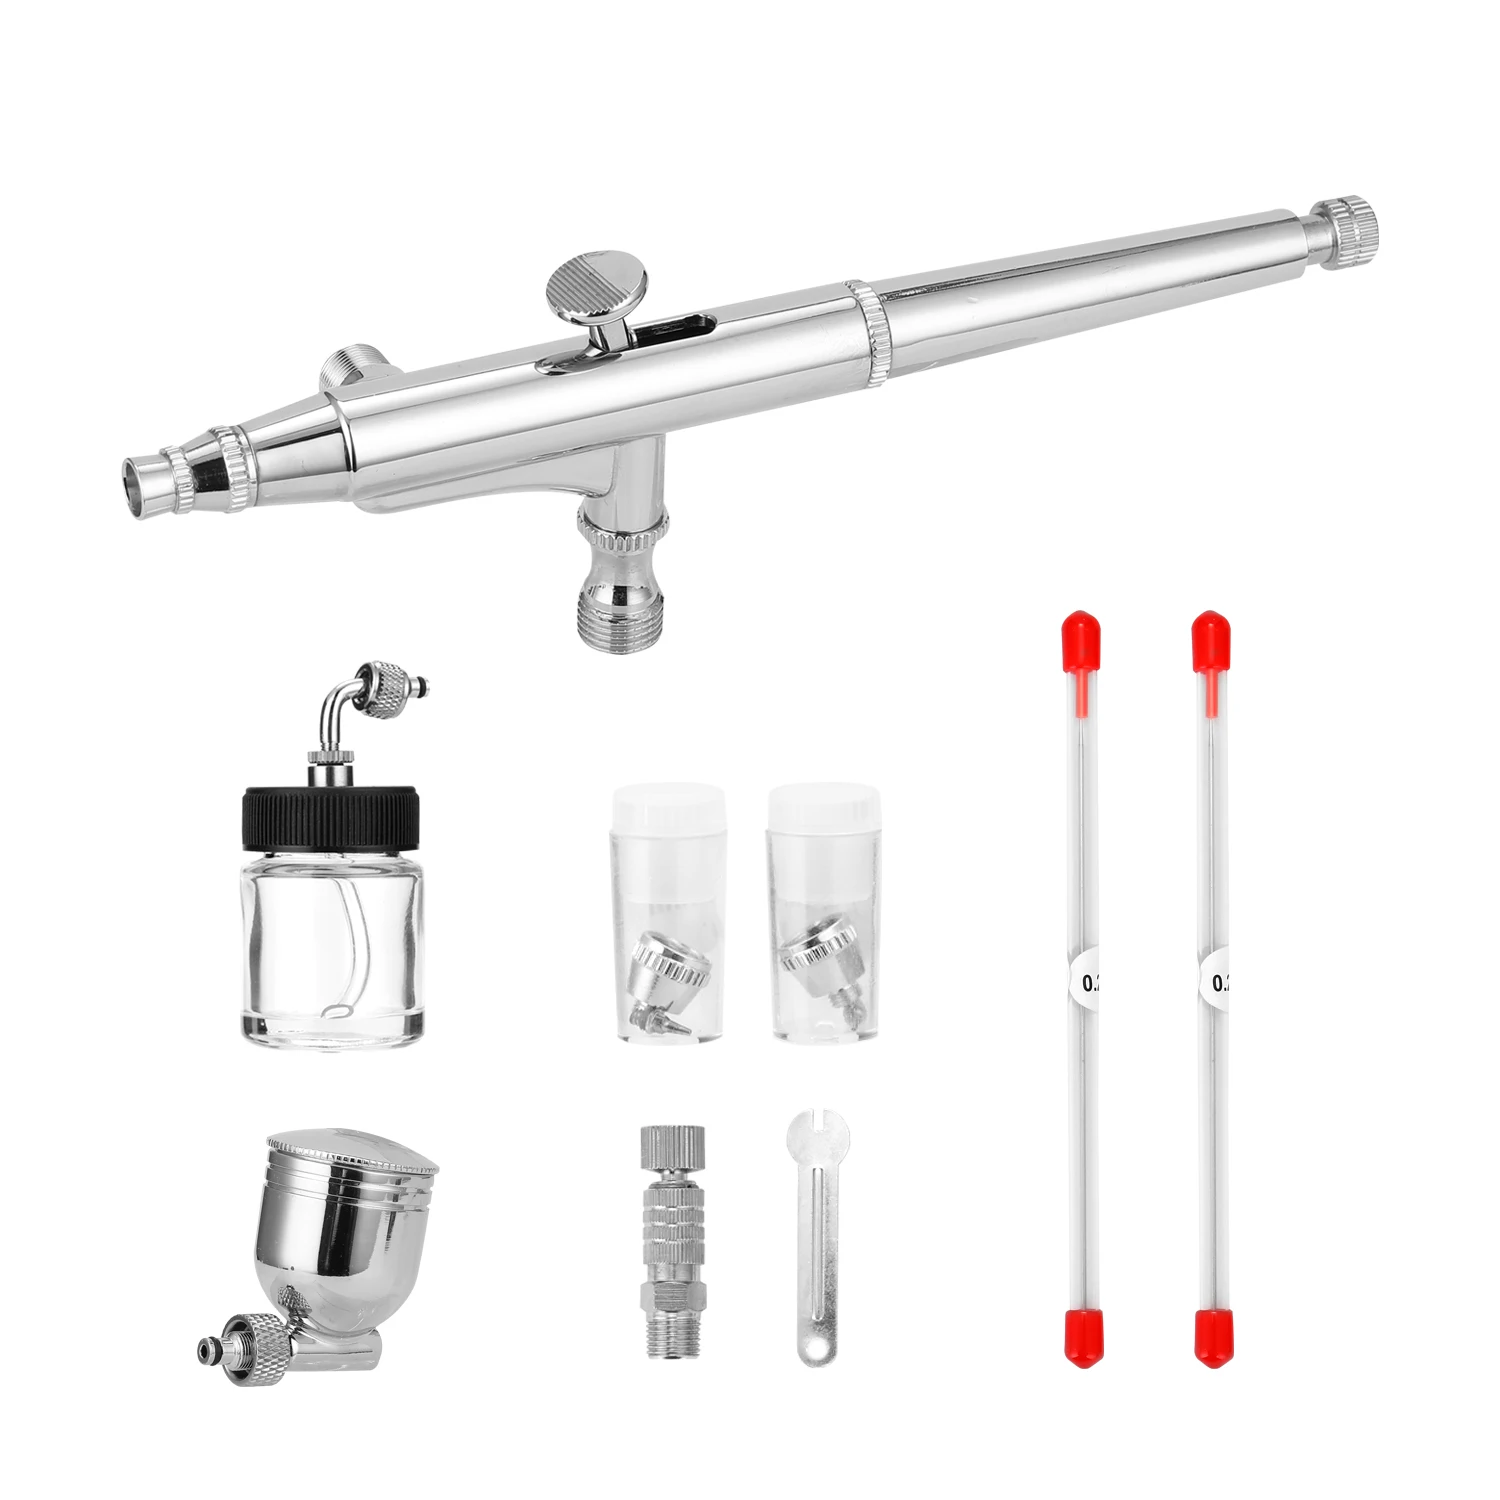 

Professional Airbrush Set Spray Gun for Model Making Art Painting with G1/8 Adapter Wrentch 2 Fluid Cups 2Needles 2 Nozzles